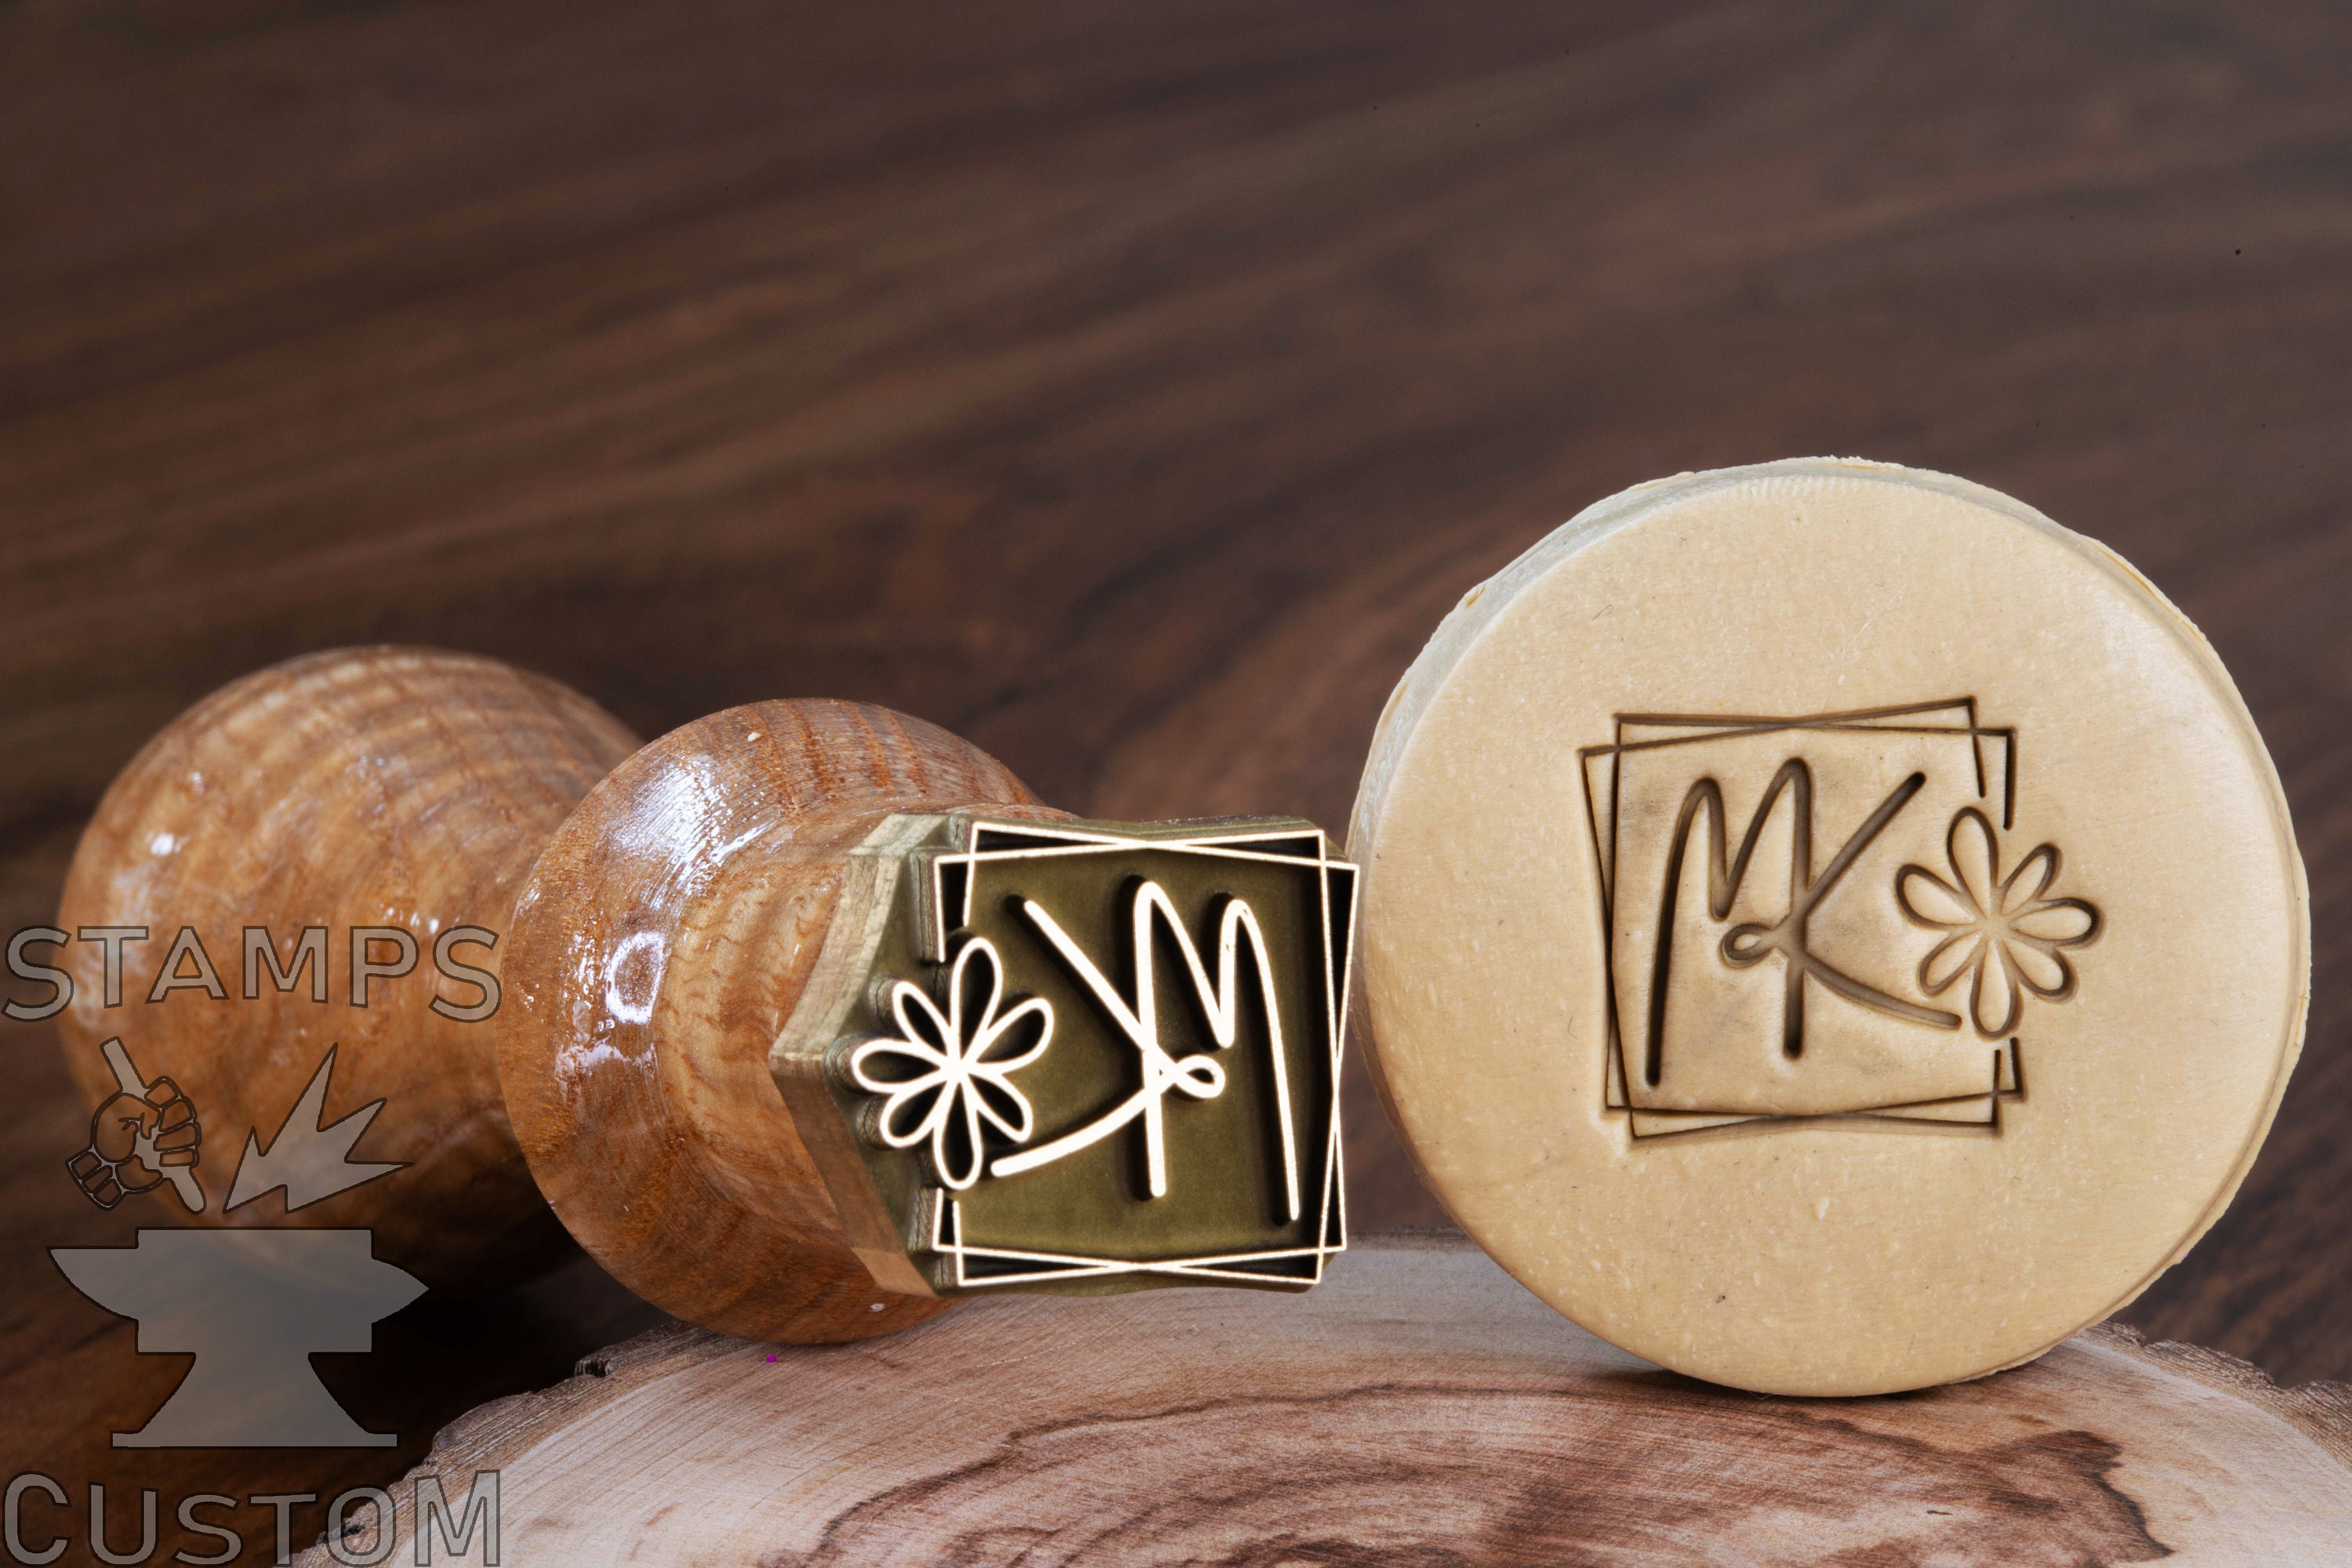 A Custom Engraved Metal (Brass) 2″ Clay Stamp - Claystamps